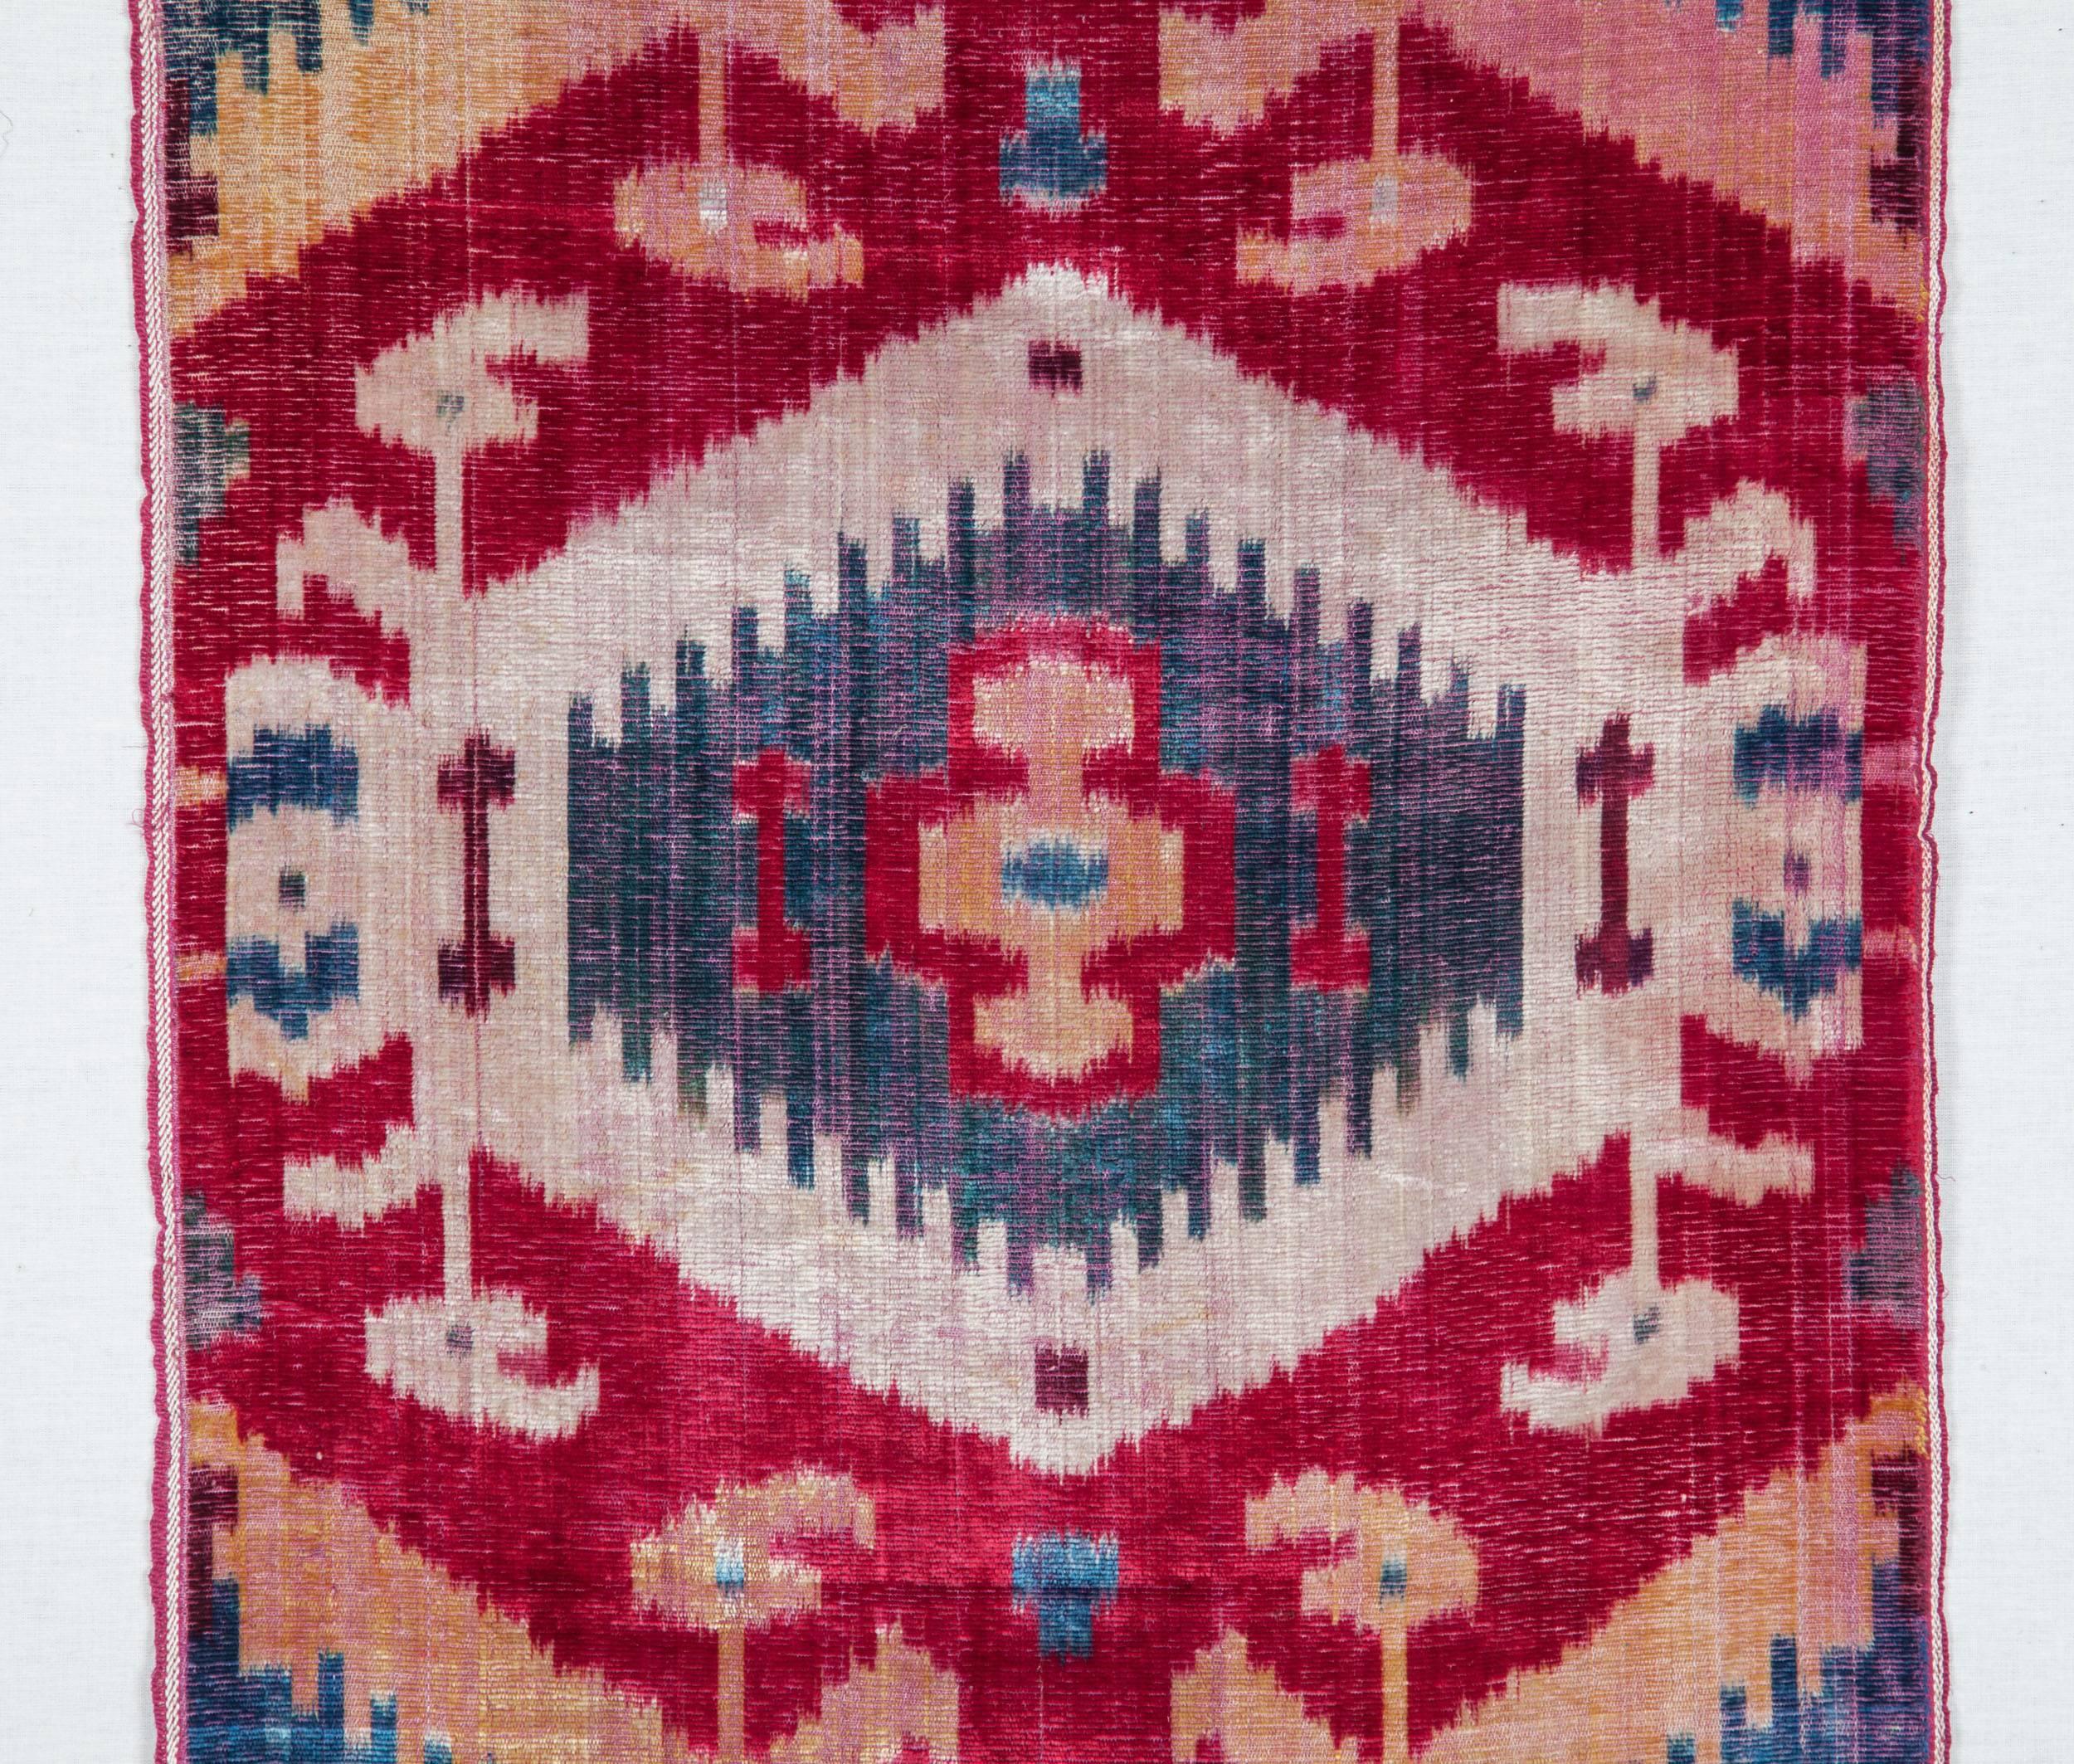 Velvet ikat technically is a very complicated way of making a textile. This panel has a rarer design in the whole design pool of silk velvet ikats from Uzbekistan.
The surface is slightly worn out but the design elements still read pretty